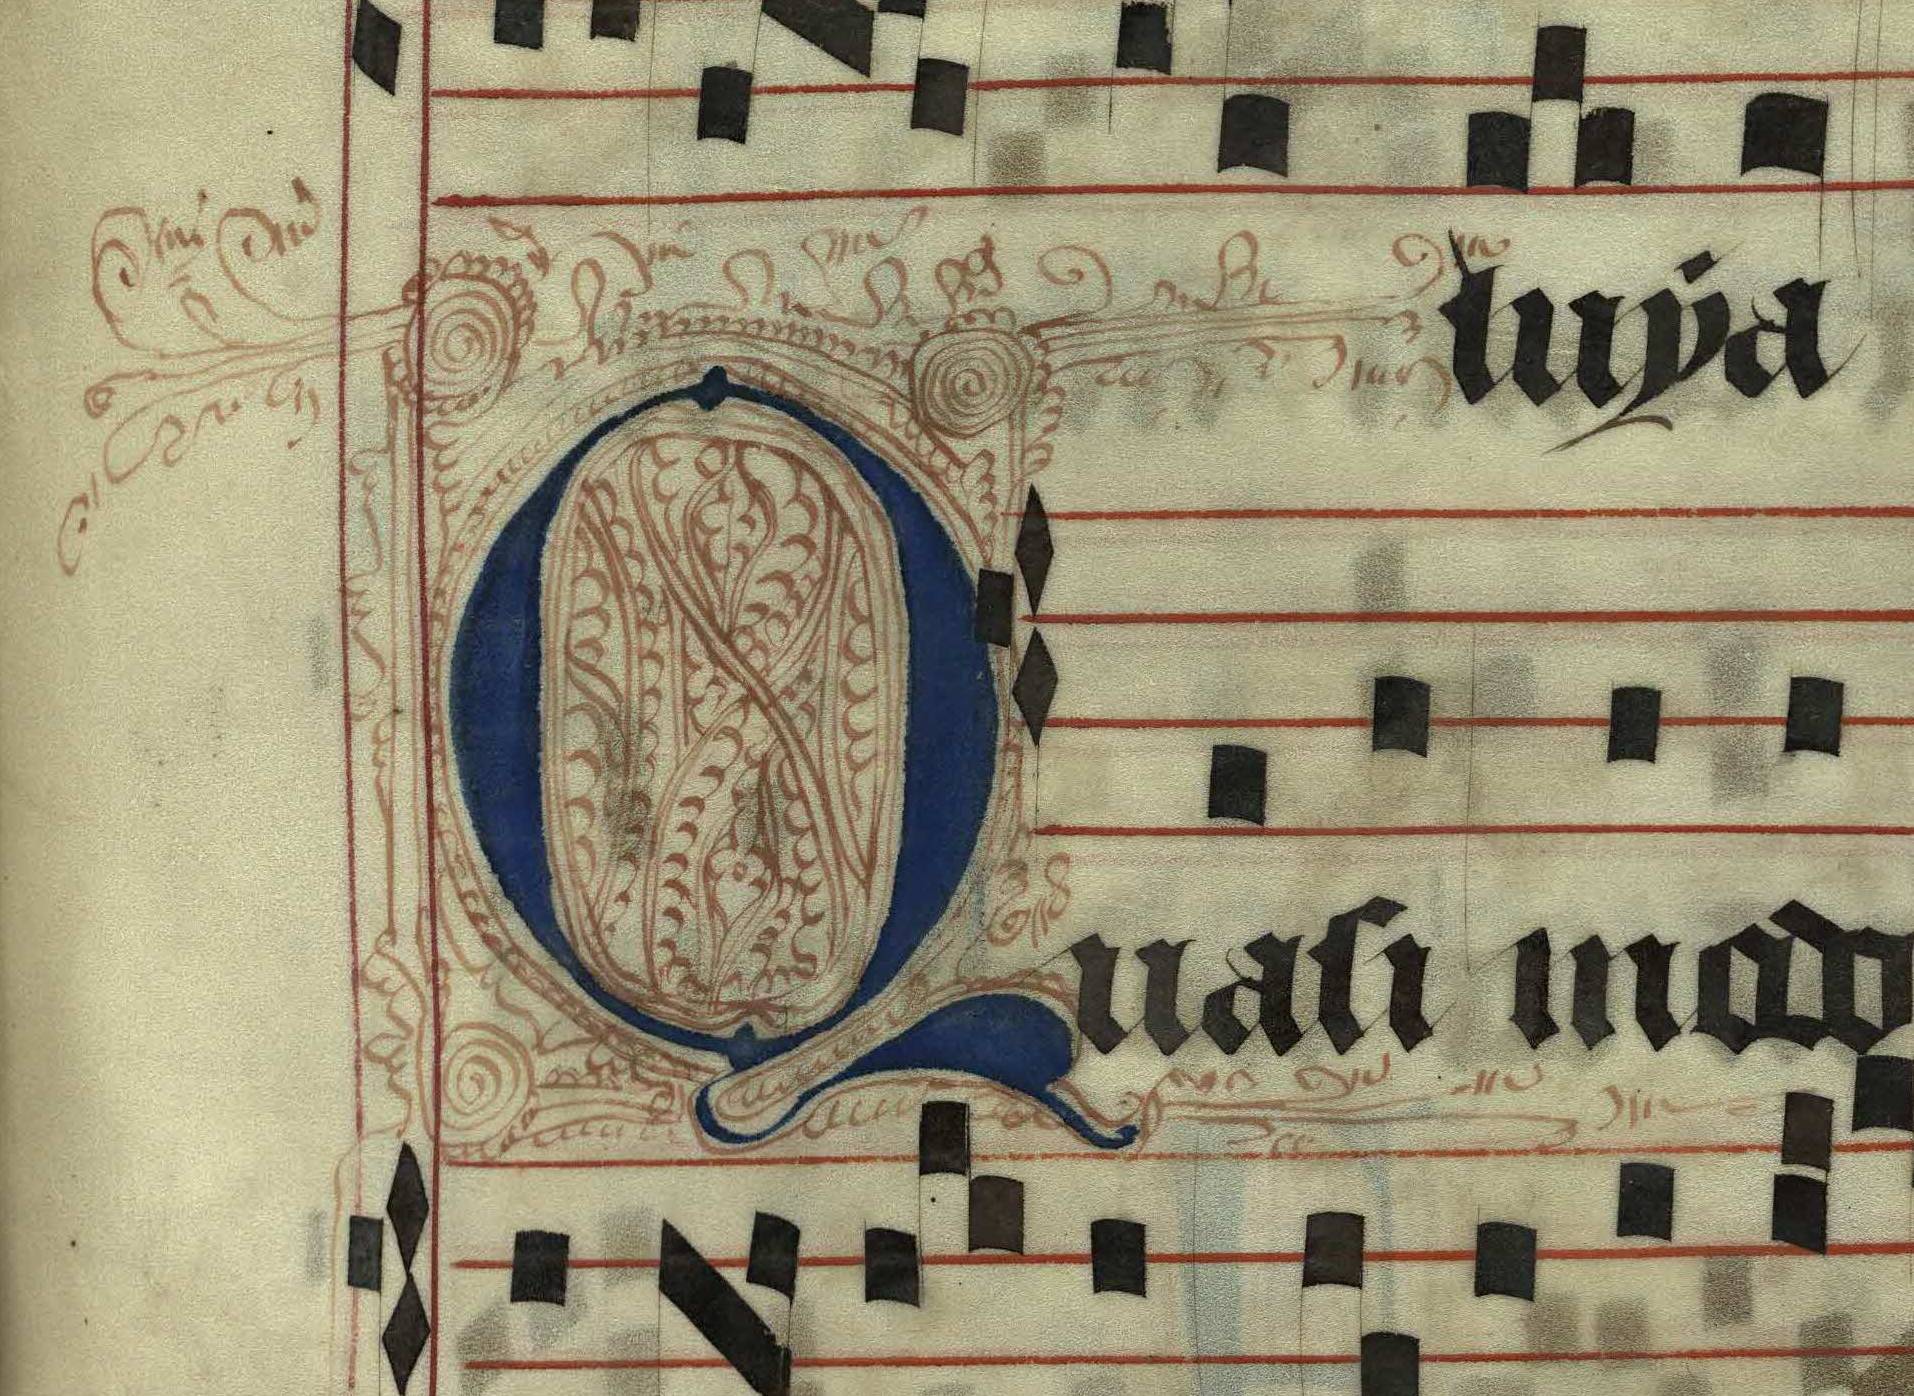 Pen decorated initial 'Q' from p. 225 of a 15th century Gradual (St Andrews msM2148.G7)